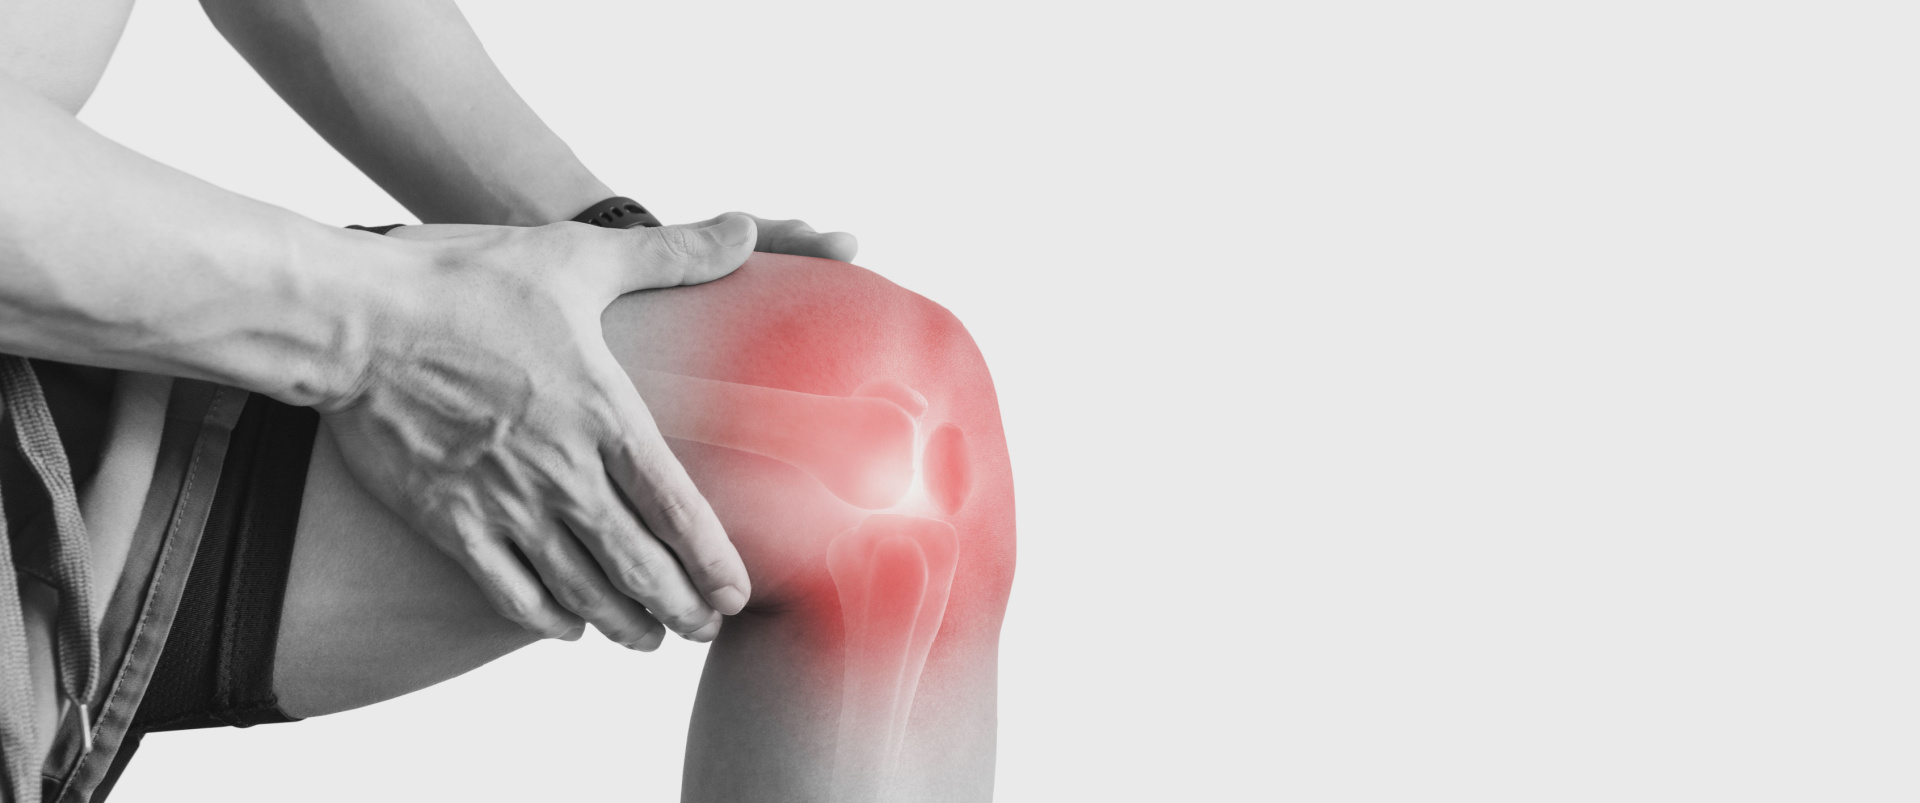 Ways to Manage Knee and Joint Pain